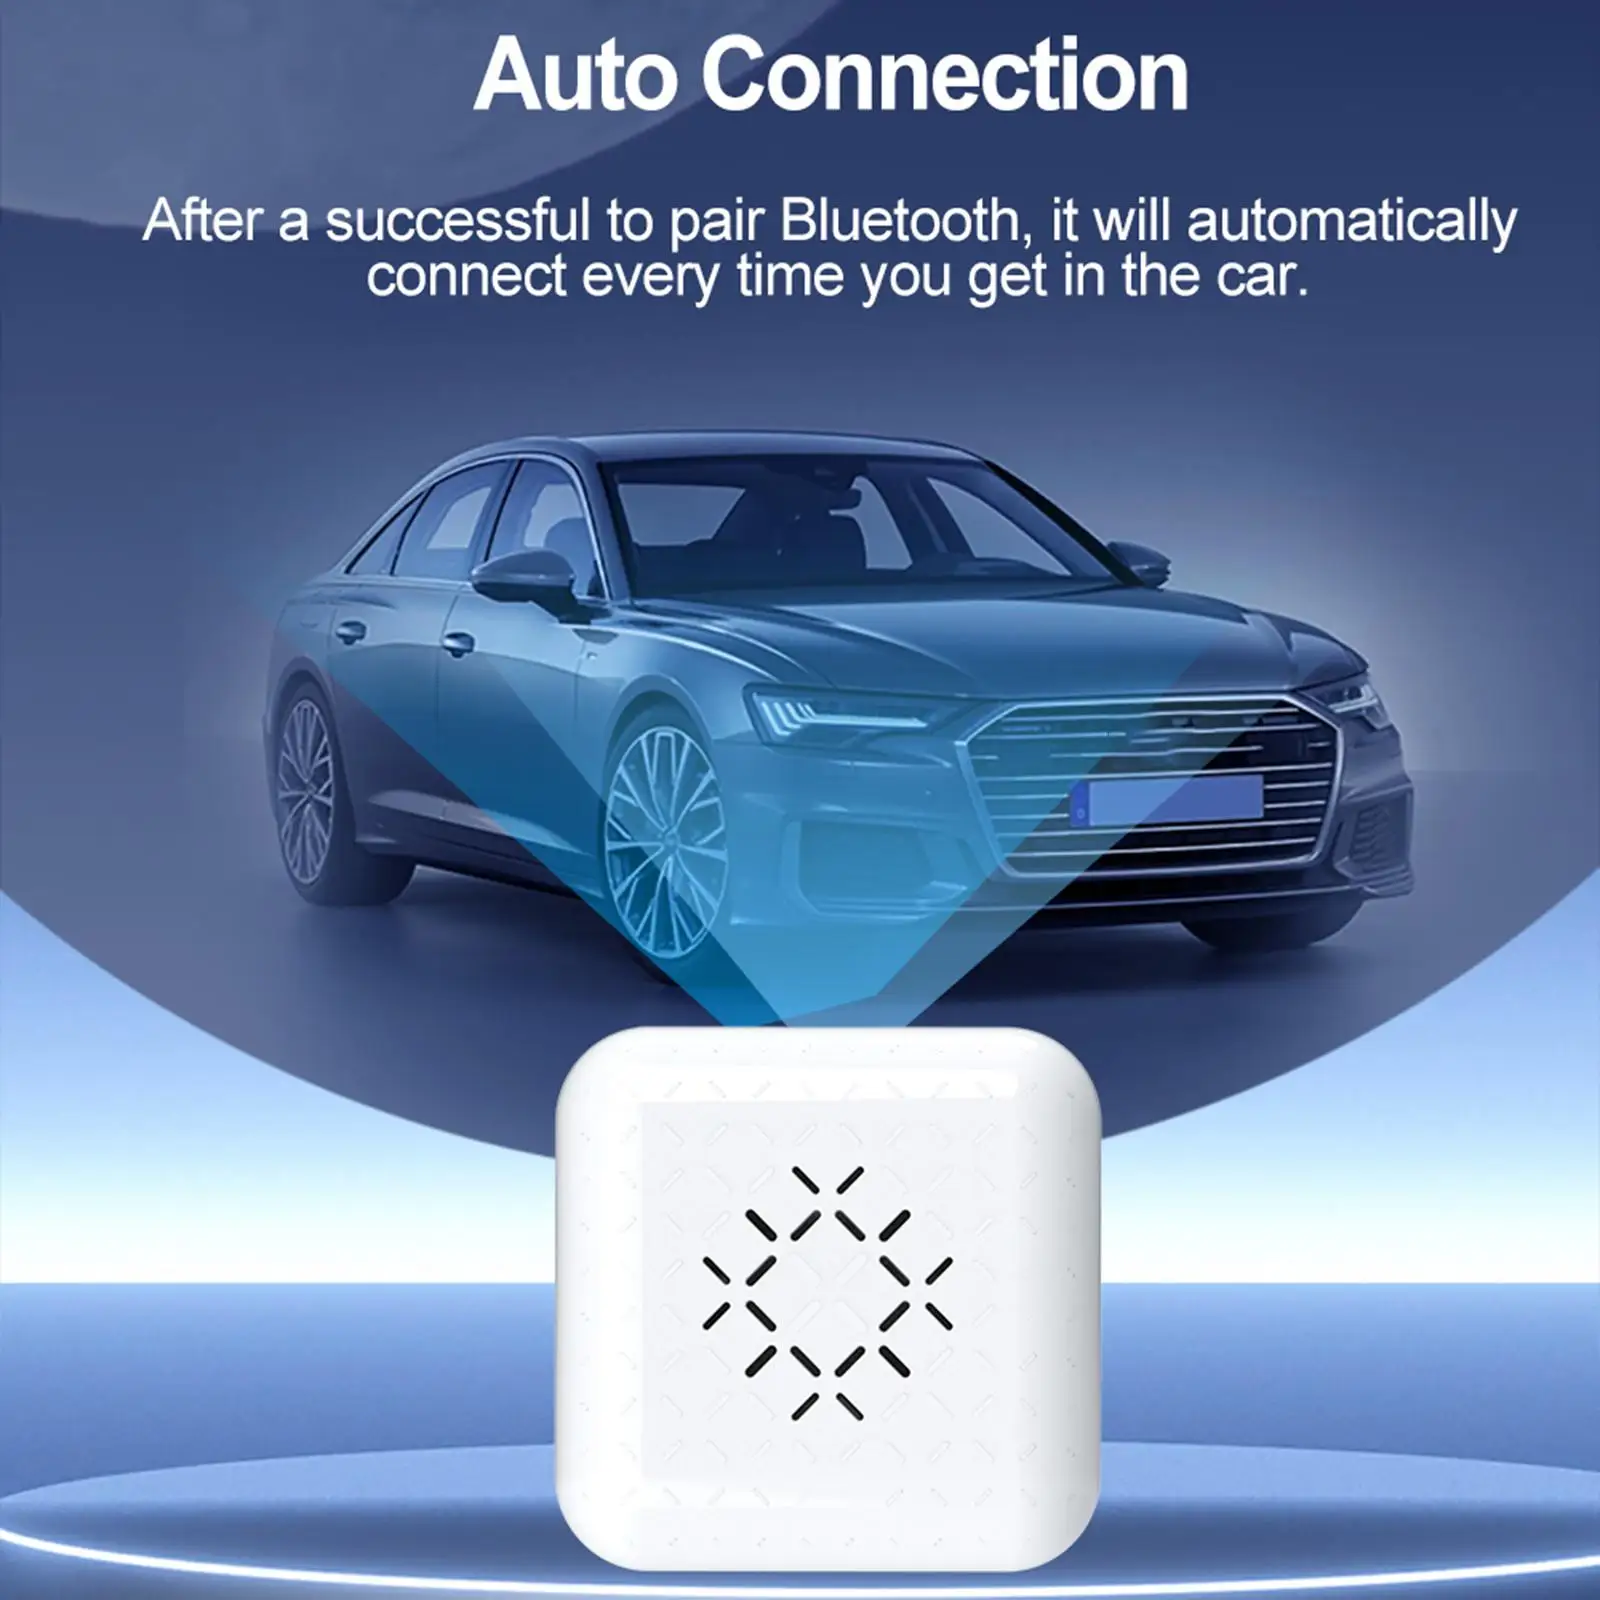 Wireless Car Play Adapter, Support Siri Plug and Play Auto Connect Online Update 5G WiFi Dongle for Cars with Car Play Function